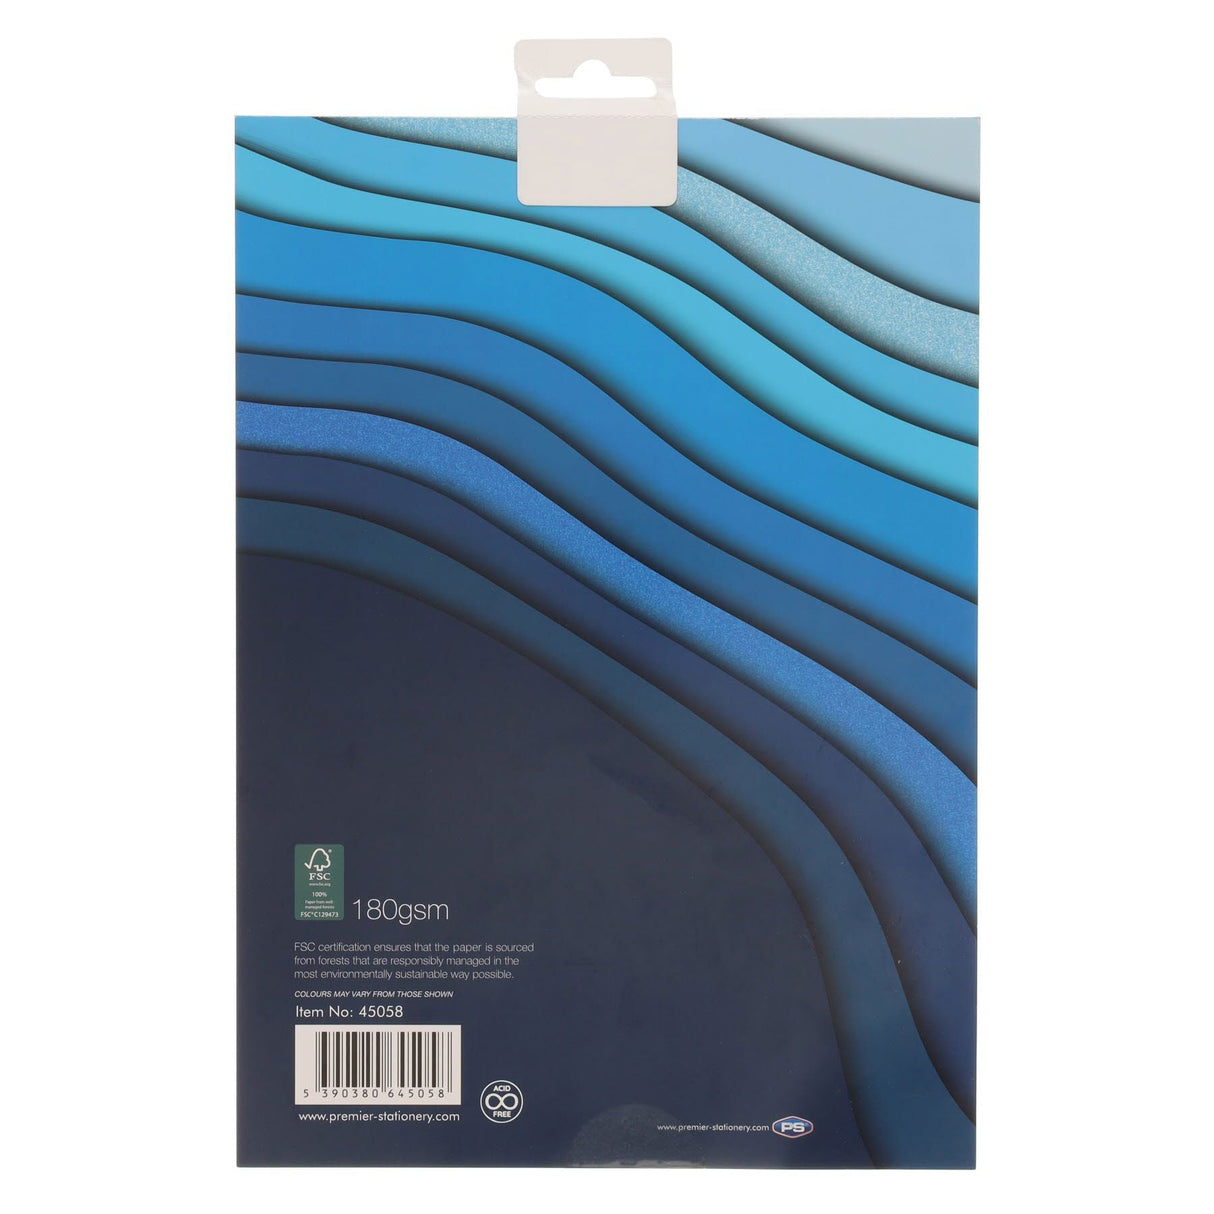 Premier Activity A4 Paper Pad - 24 Sheets - 180gsm - Shades of Blue | Stationery Shop UK